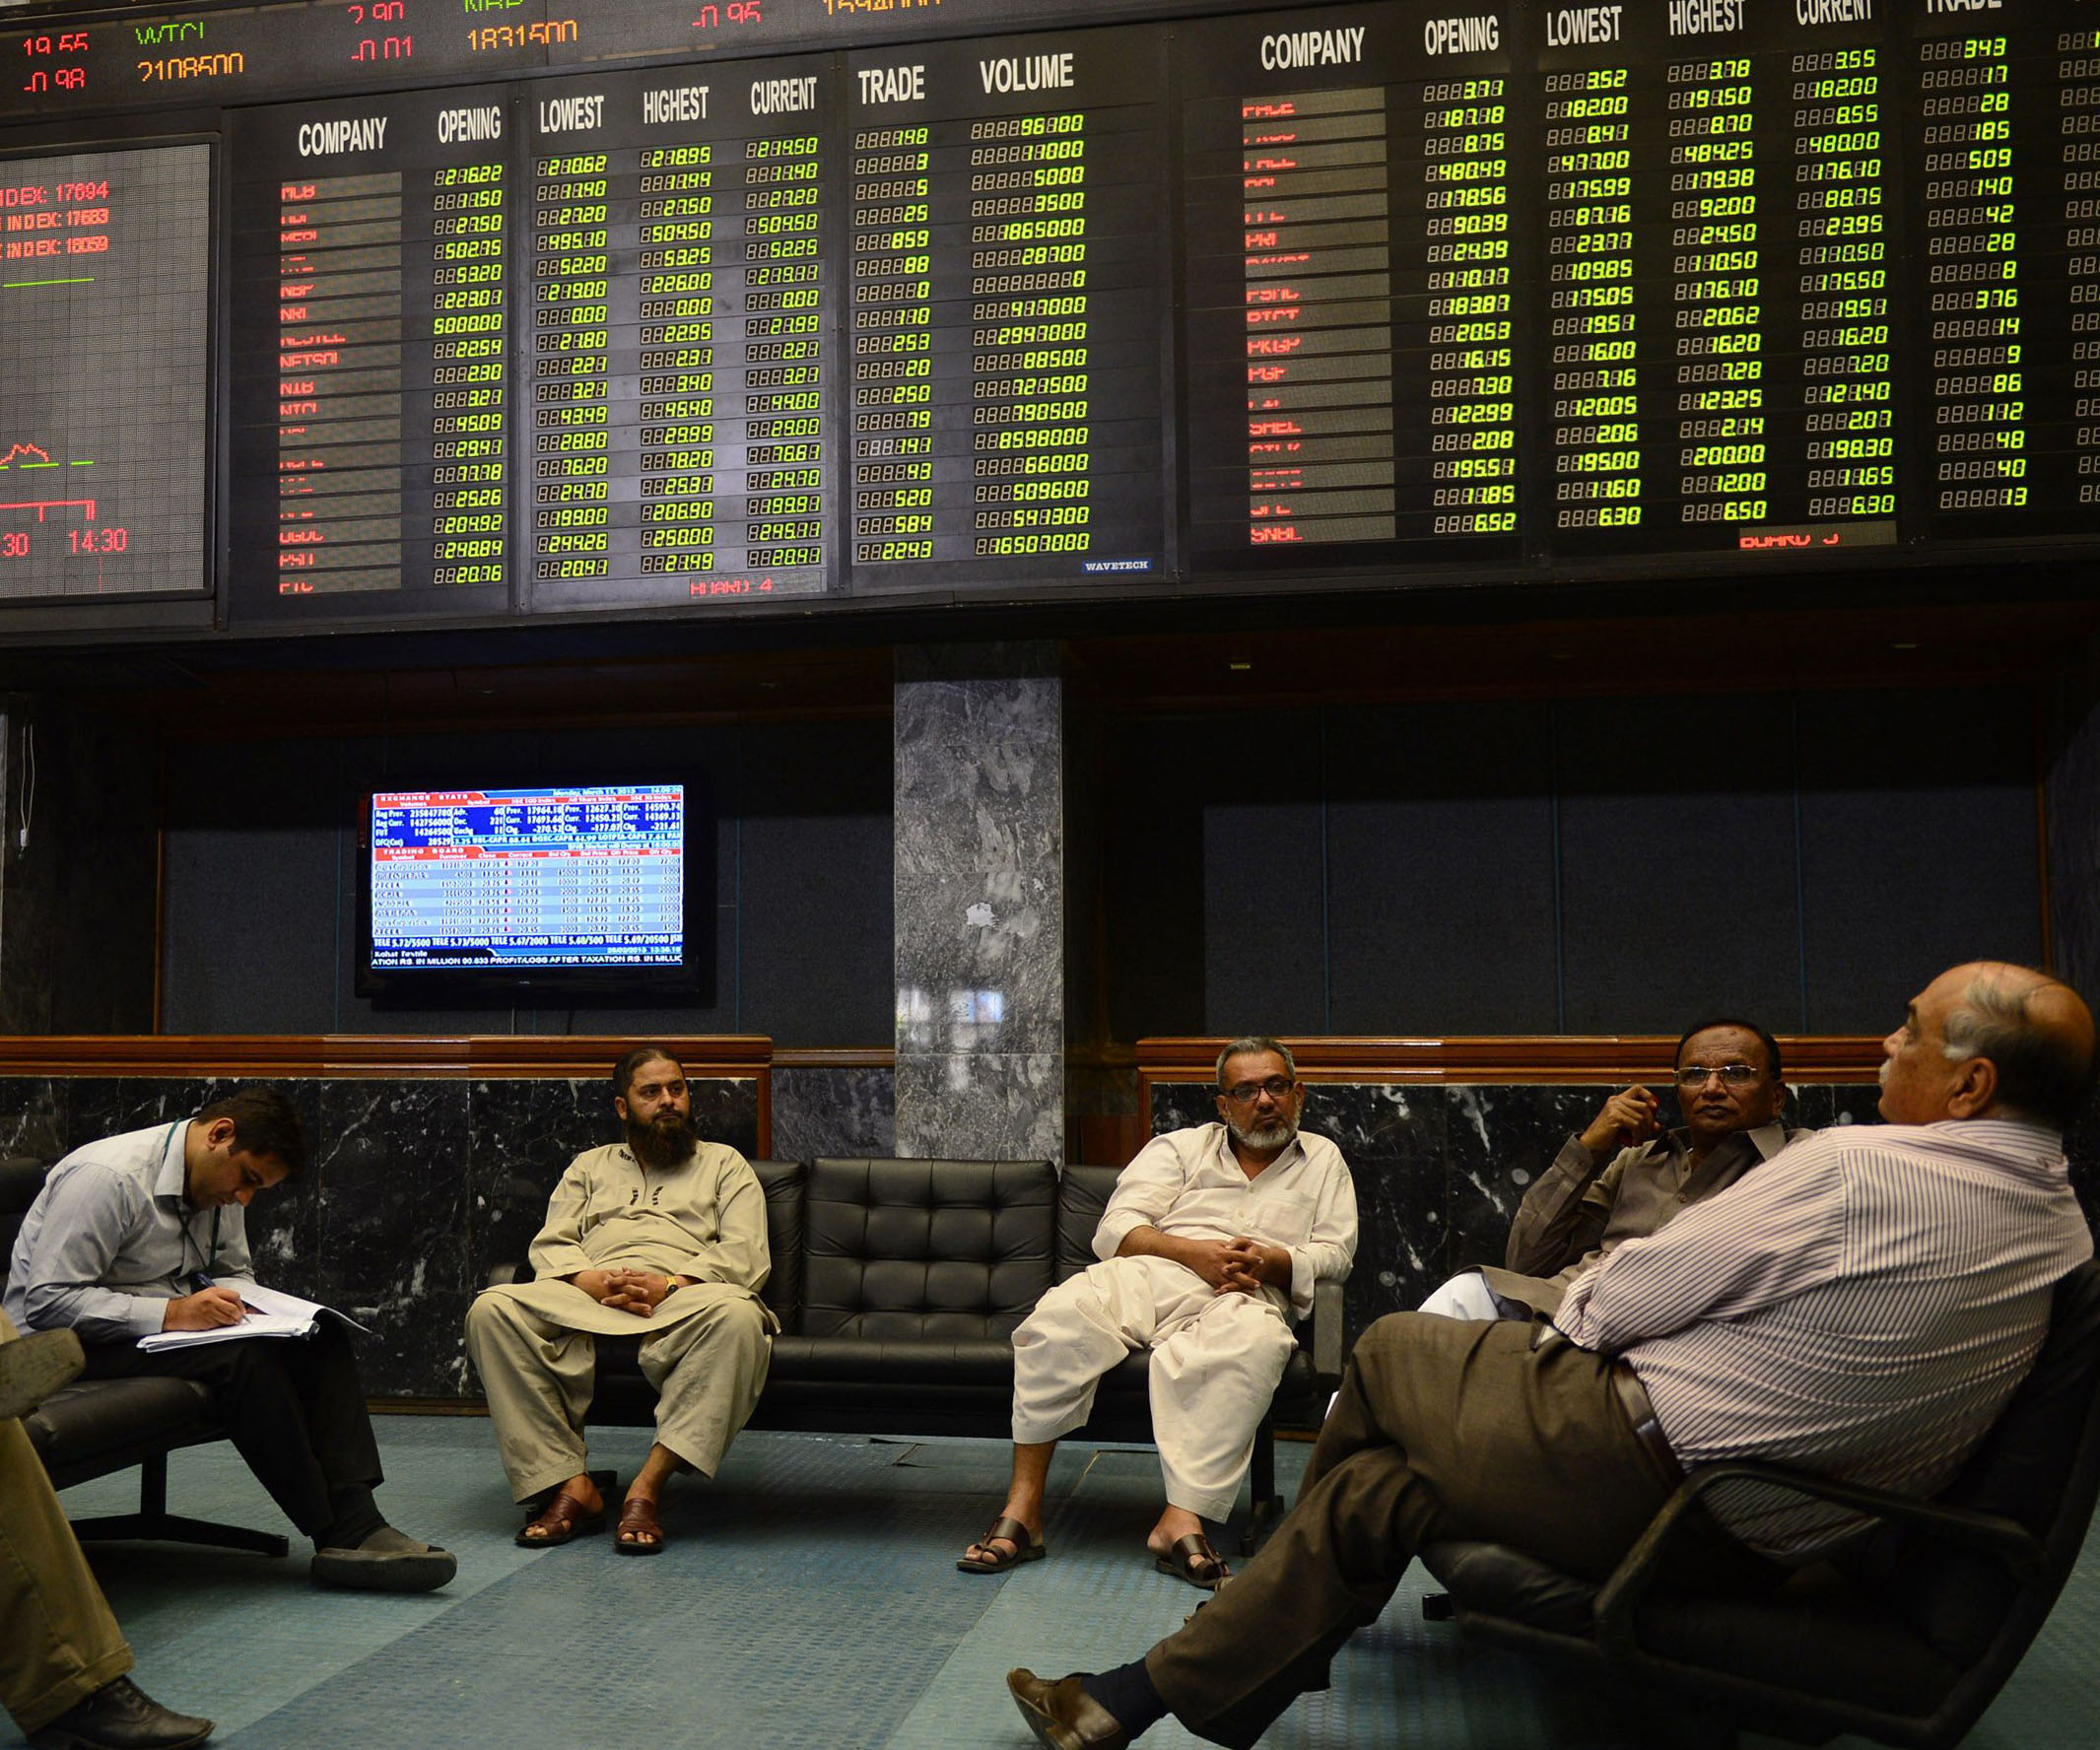 benchmark index increases 1 66 to settle at 38 965 01 photo afp